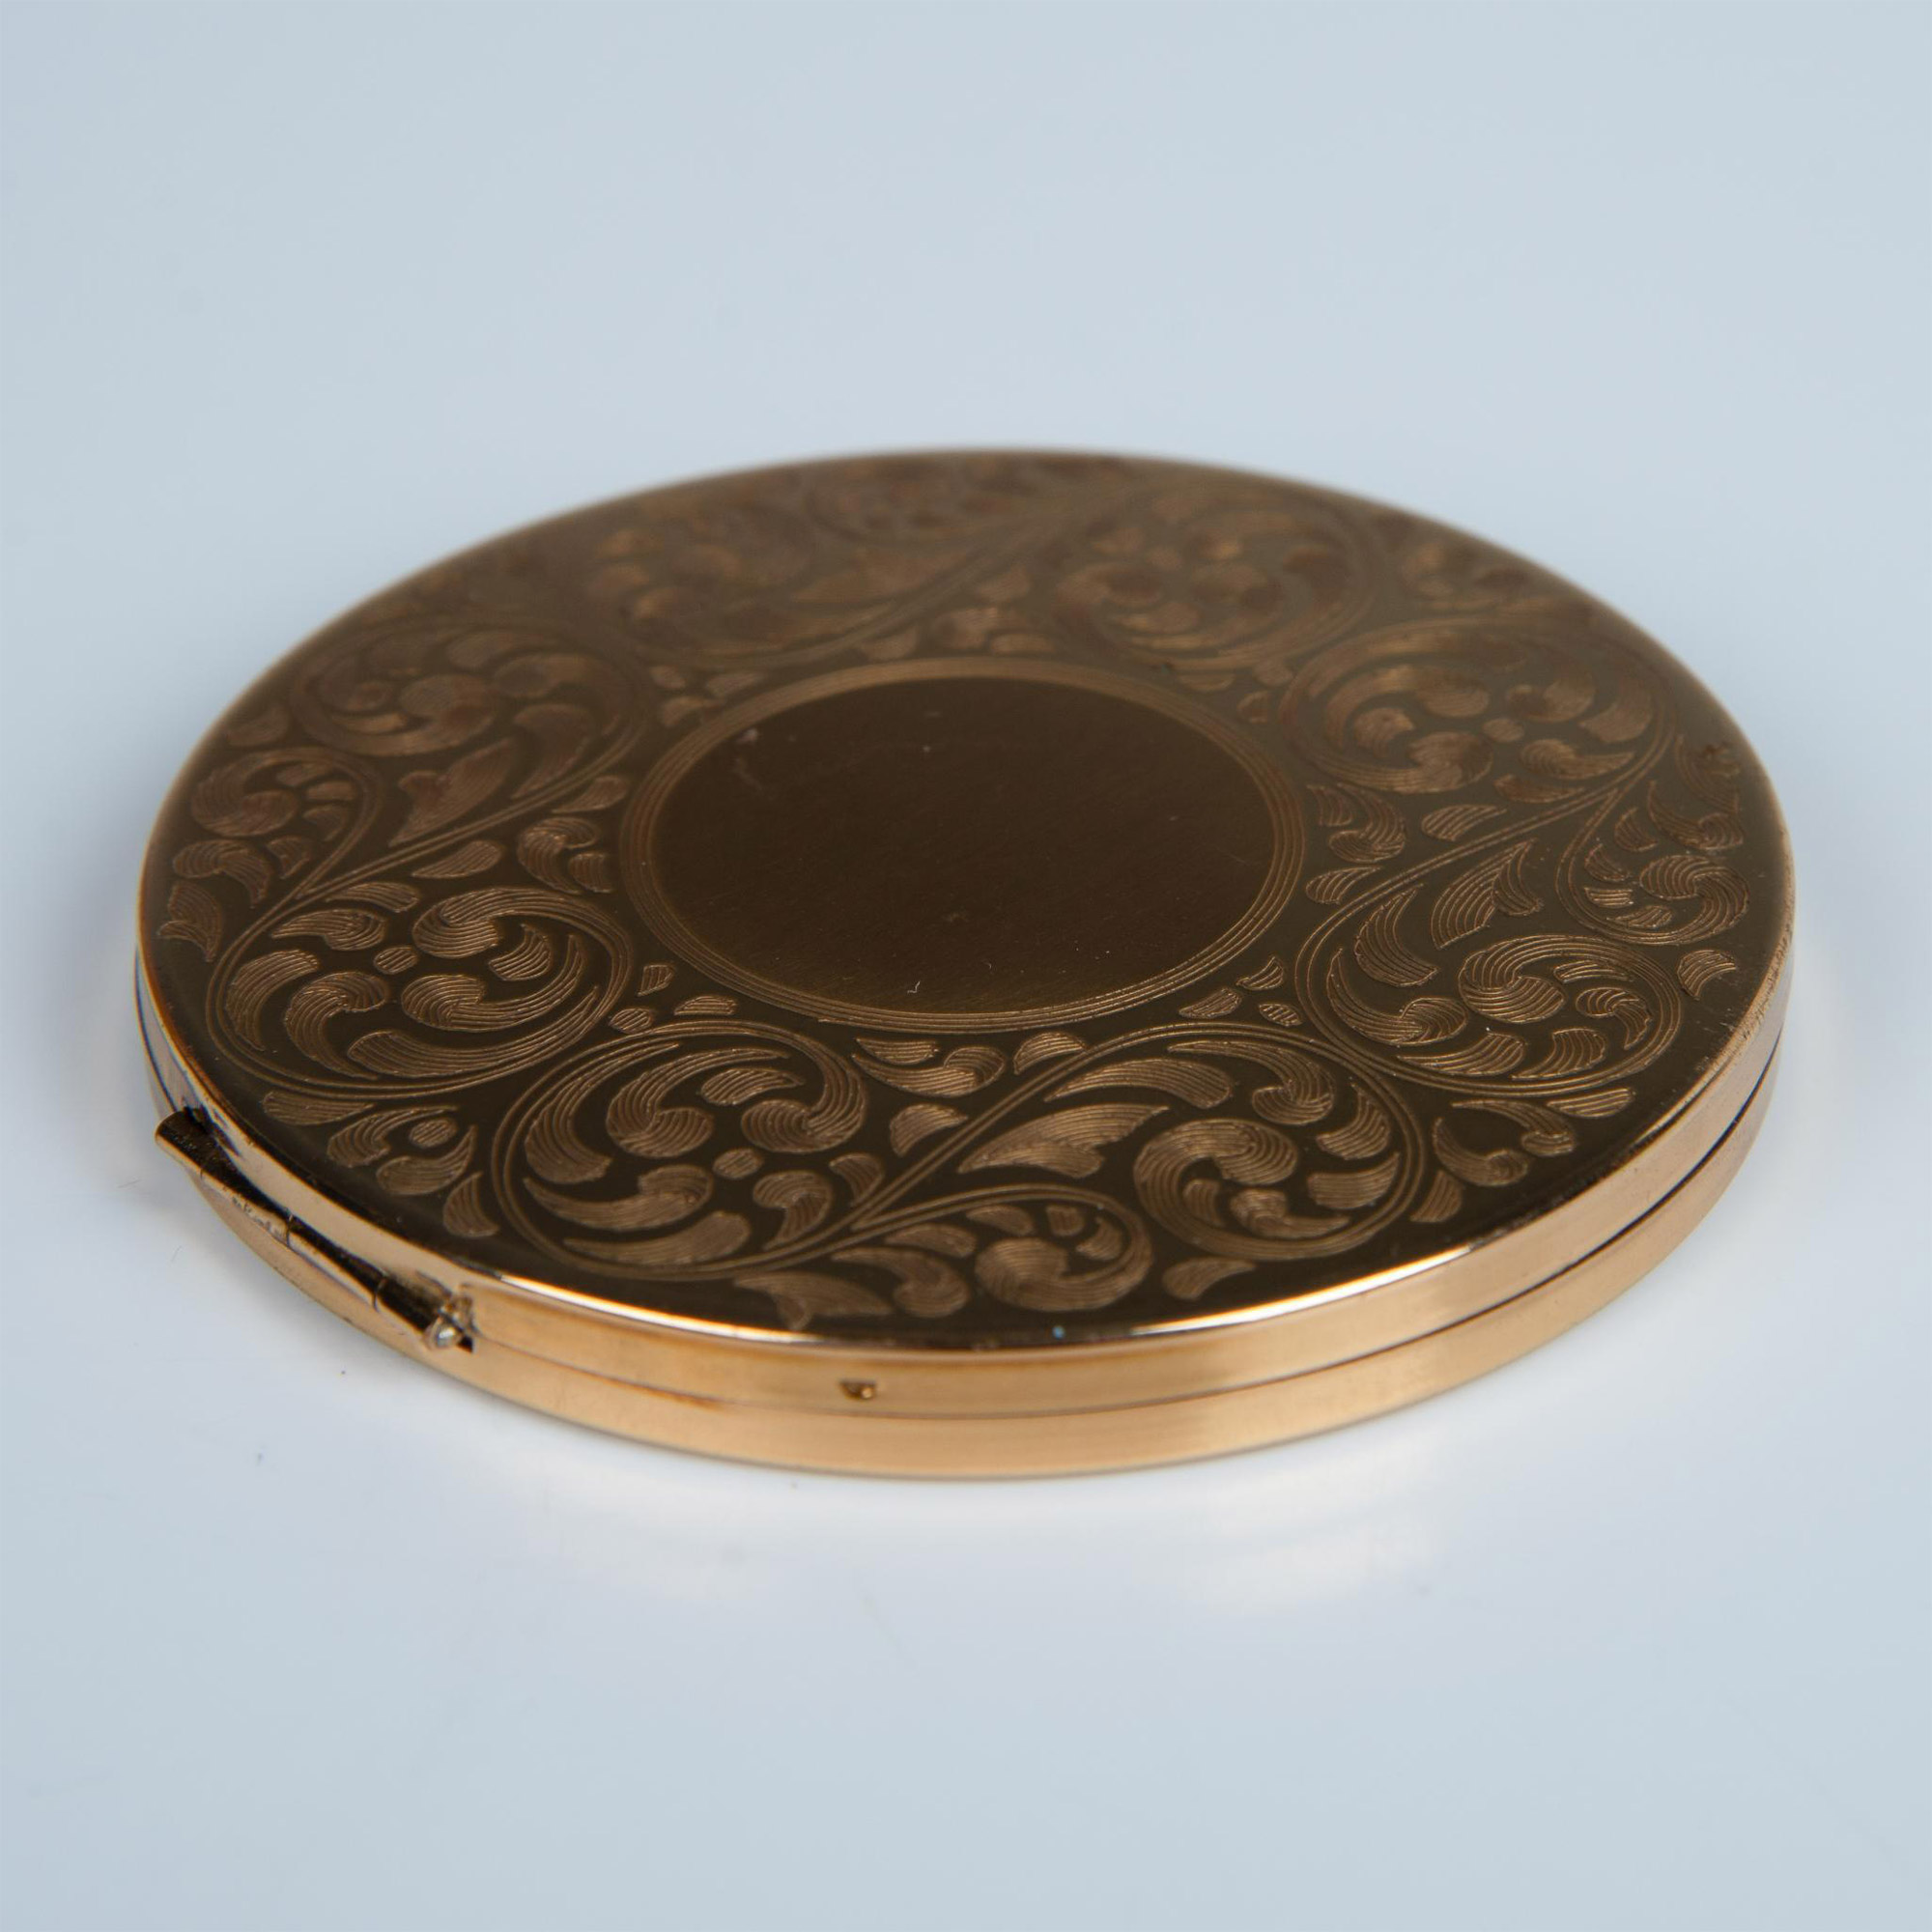 Vintage Elgin Round Etched Gold Metal Compact & Puff - Image 2 of 5